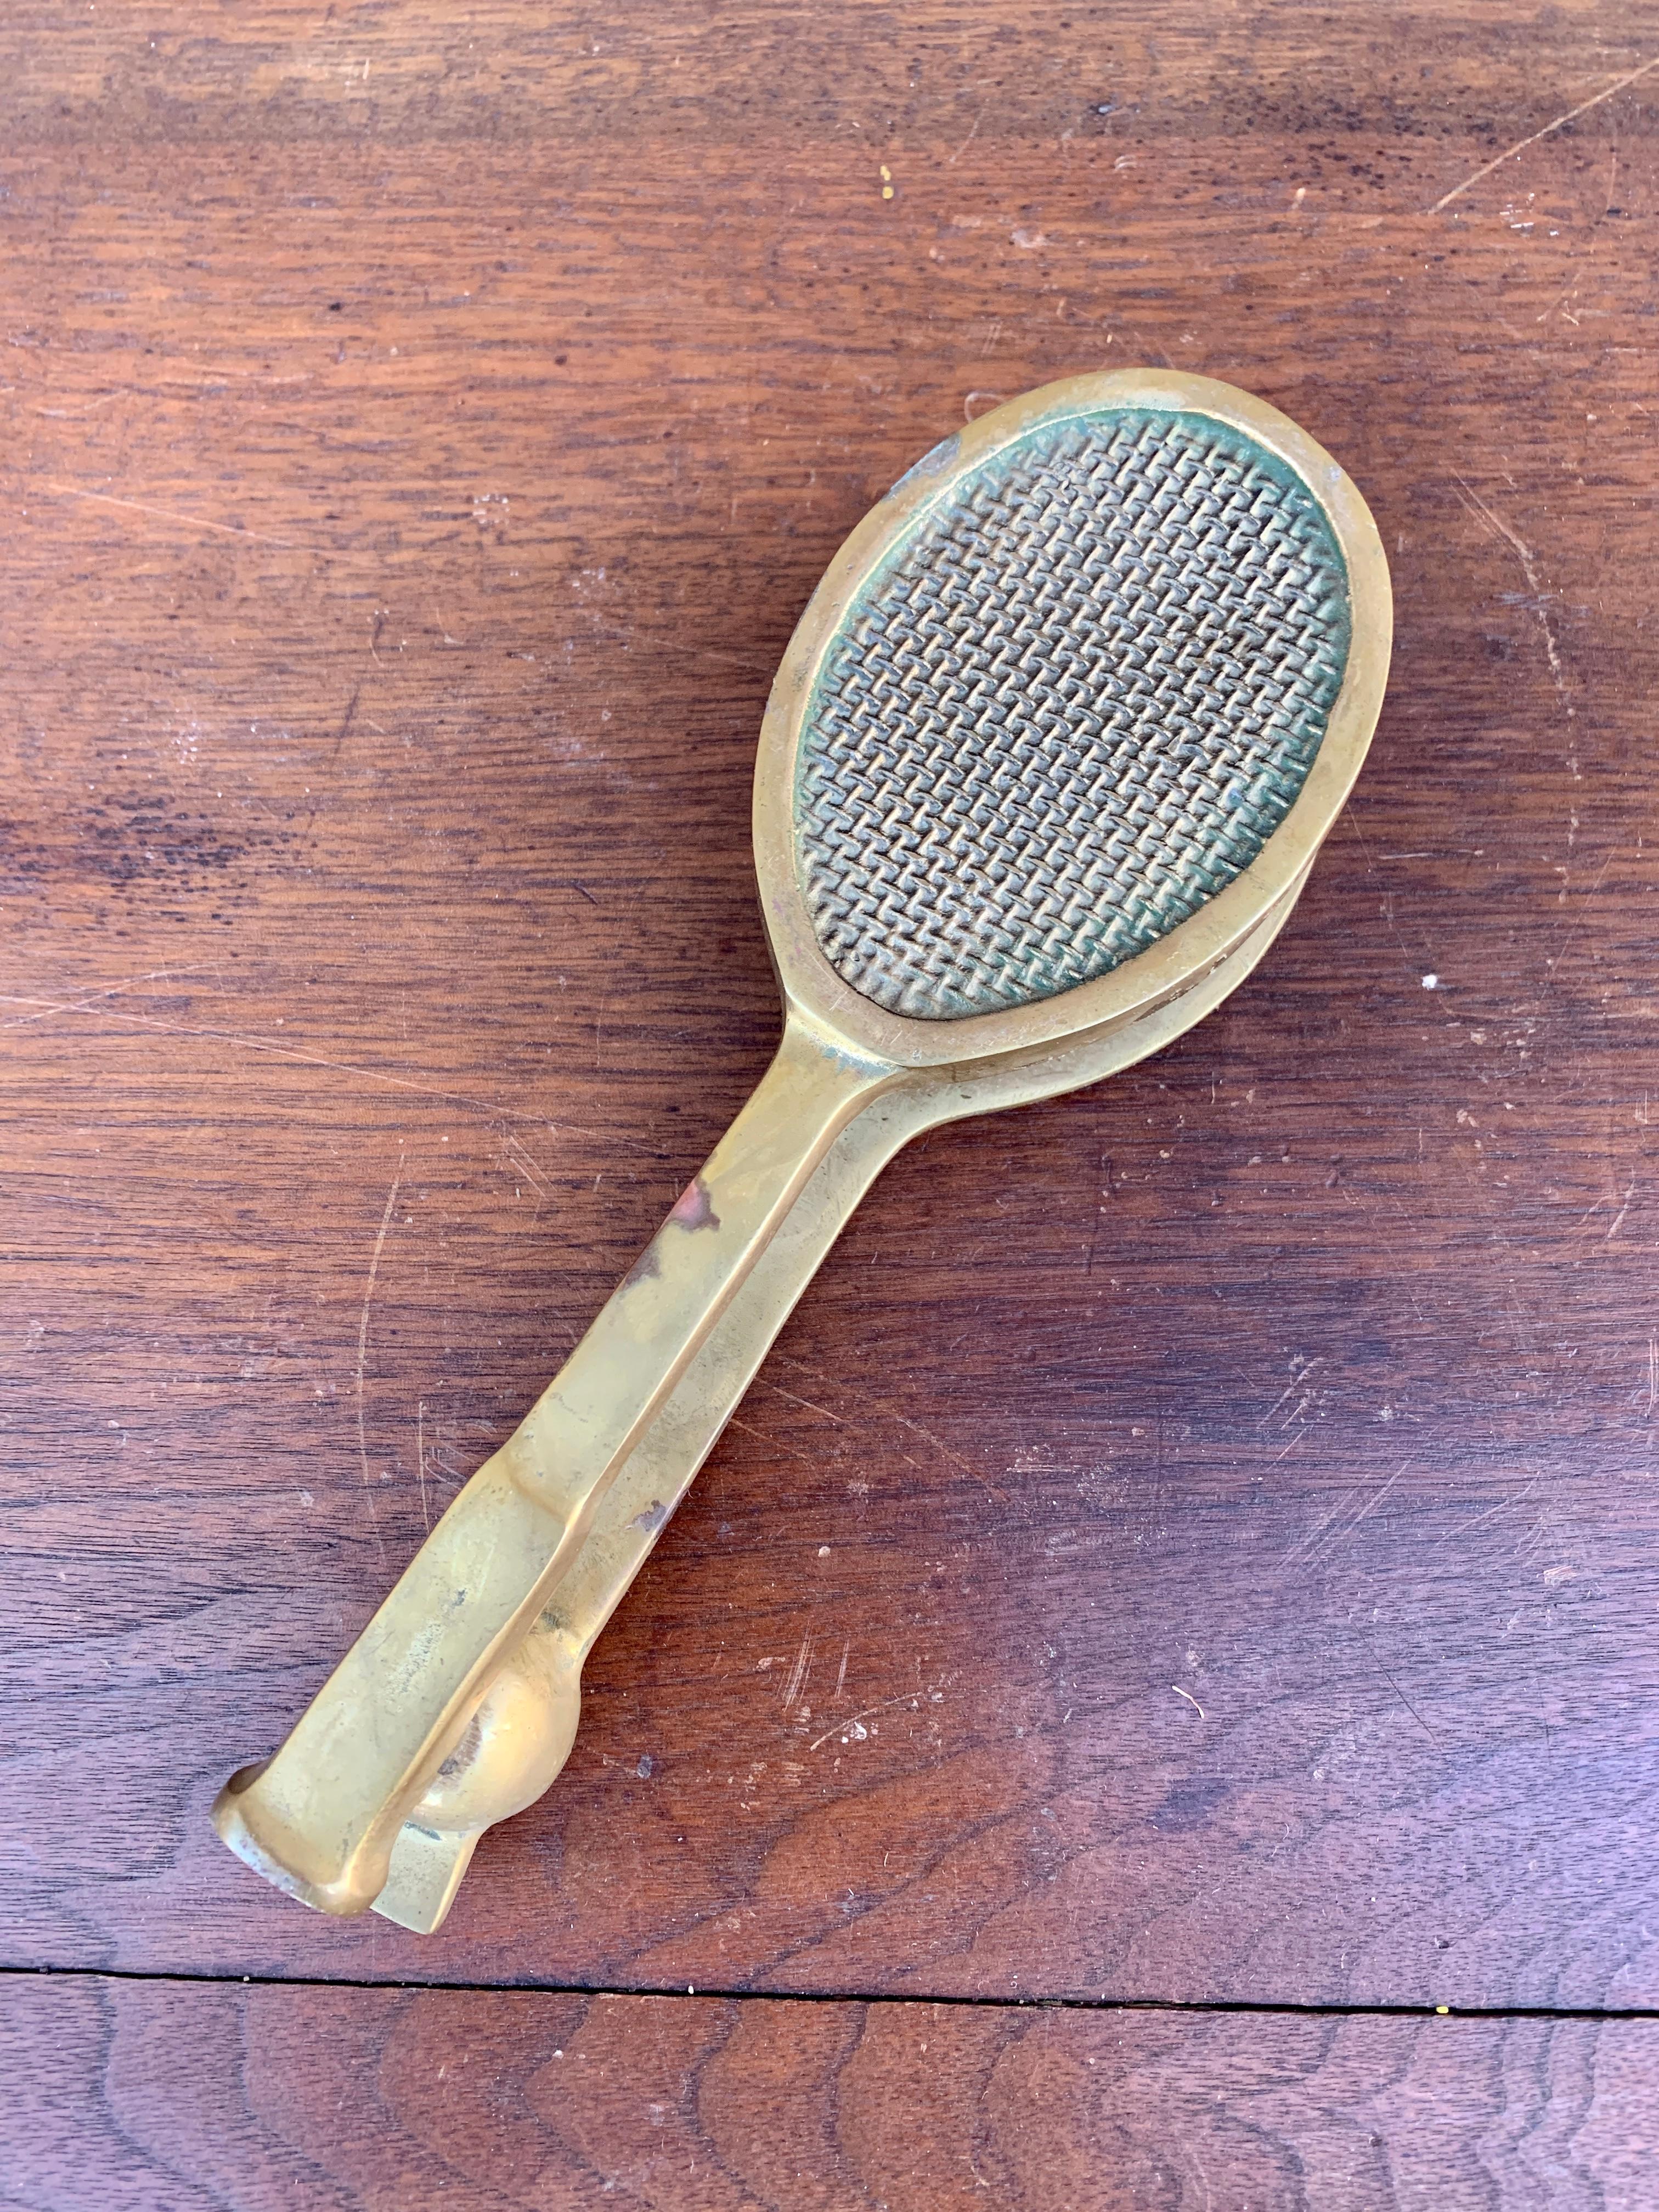 A beautiful cast brass door knocker in the form of a tennis racket.

USA, Late-20th Century

Measures: 2.75